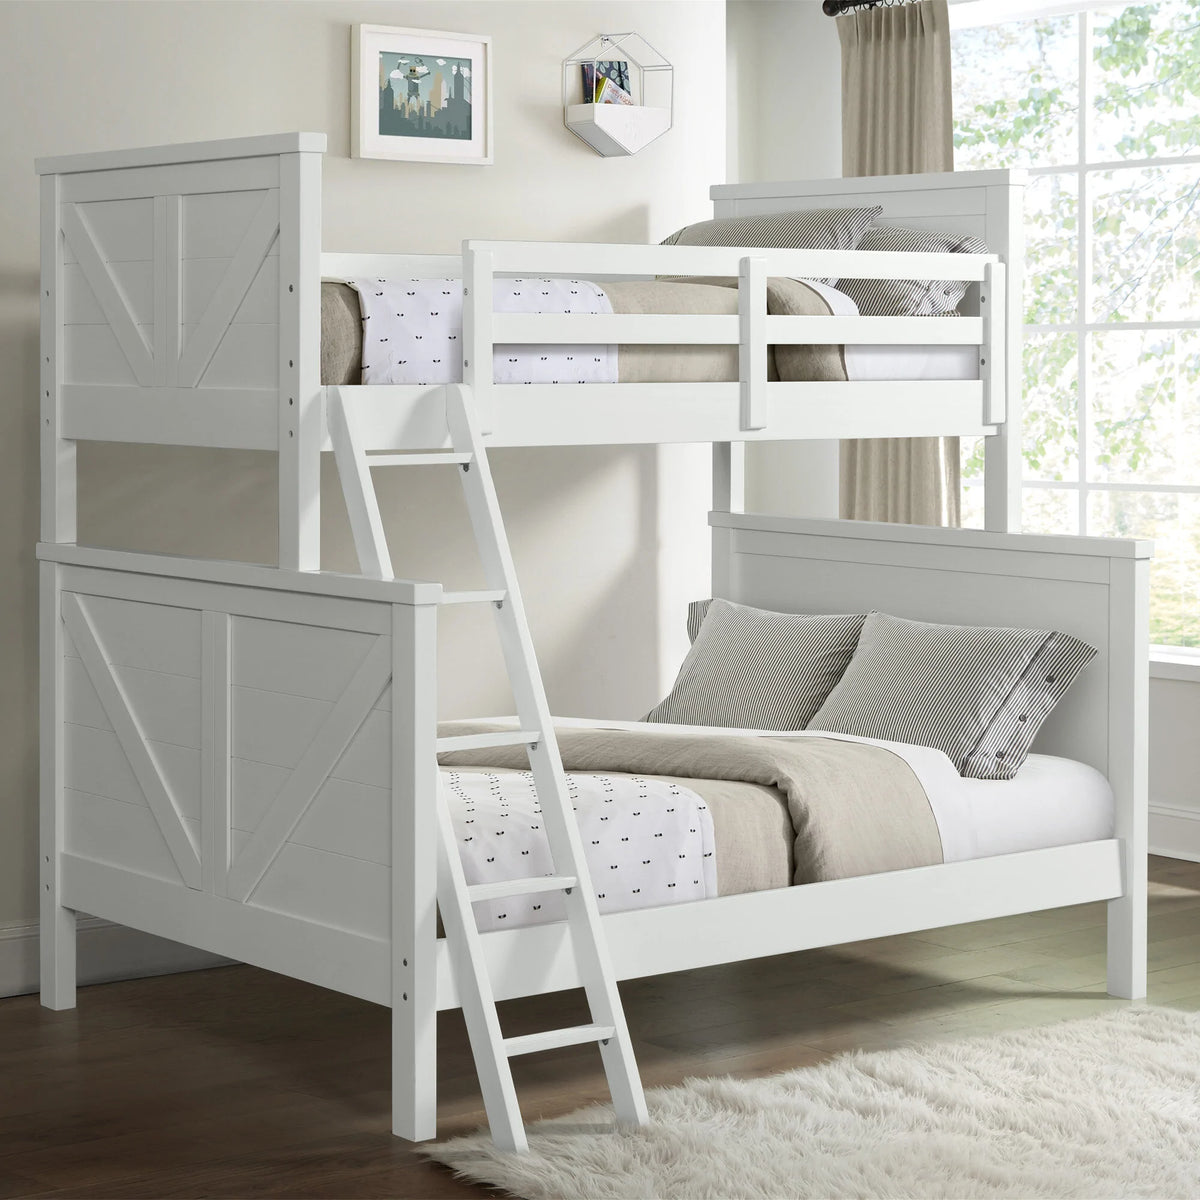 Tahoe Youth Bunk Bed (Twin/Full) Seashell